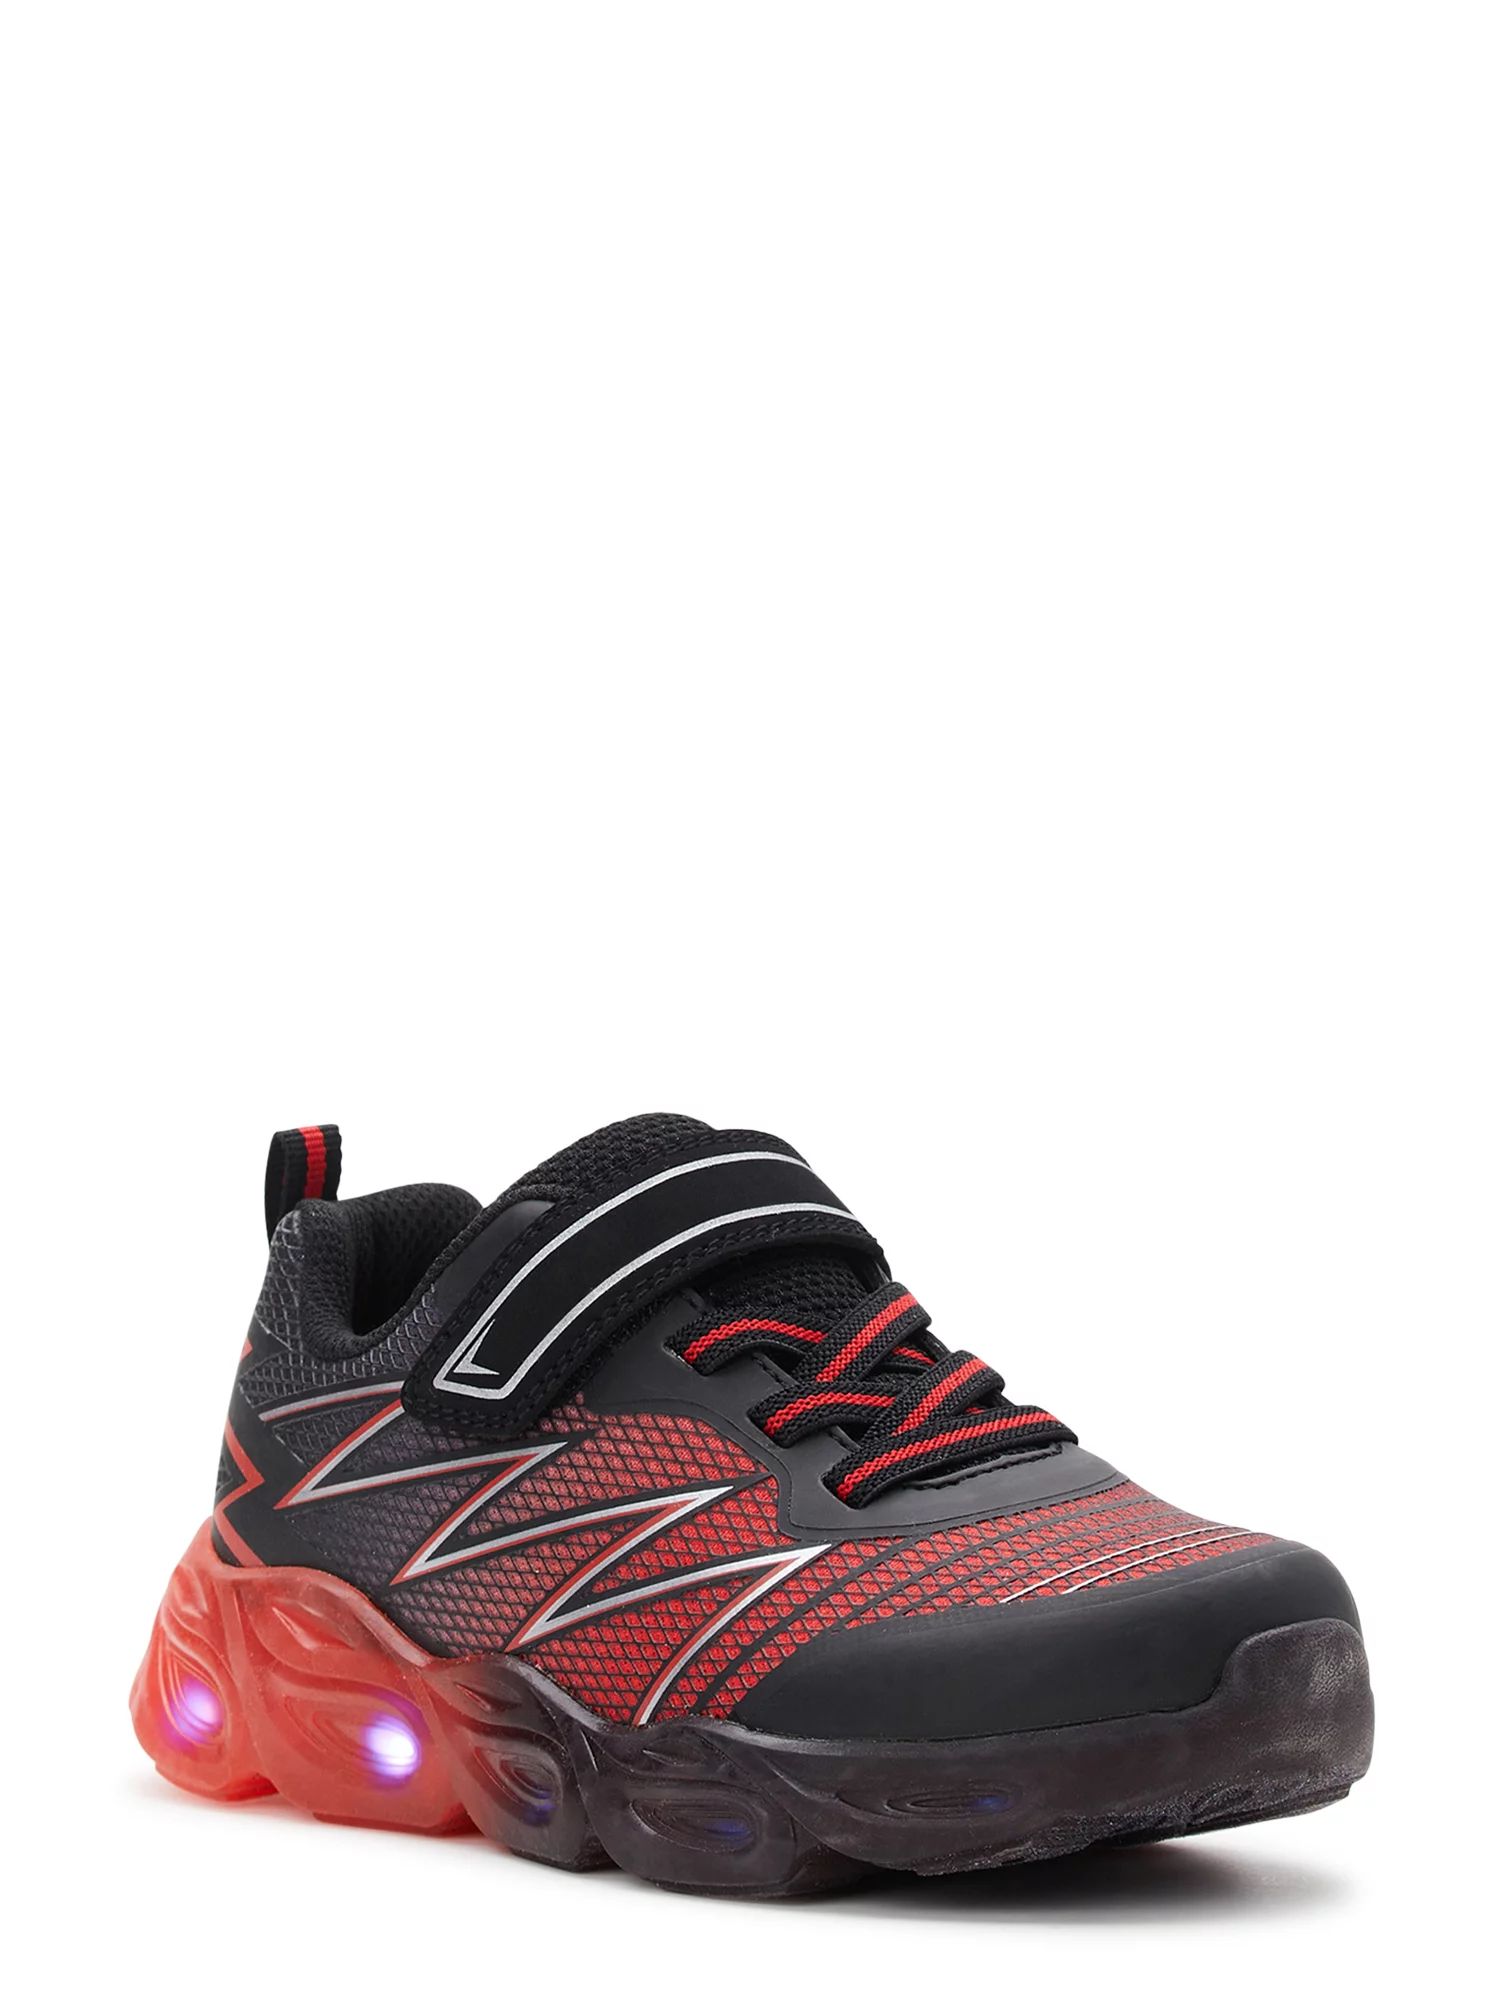 Athletic Works Boys Light Up Athletic Sneakers, Sizes 13-4 | Walmart (US)